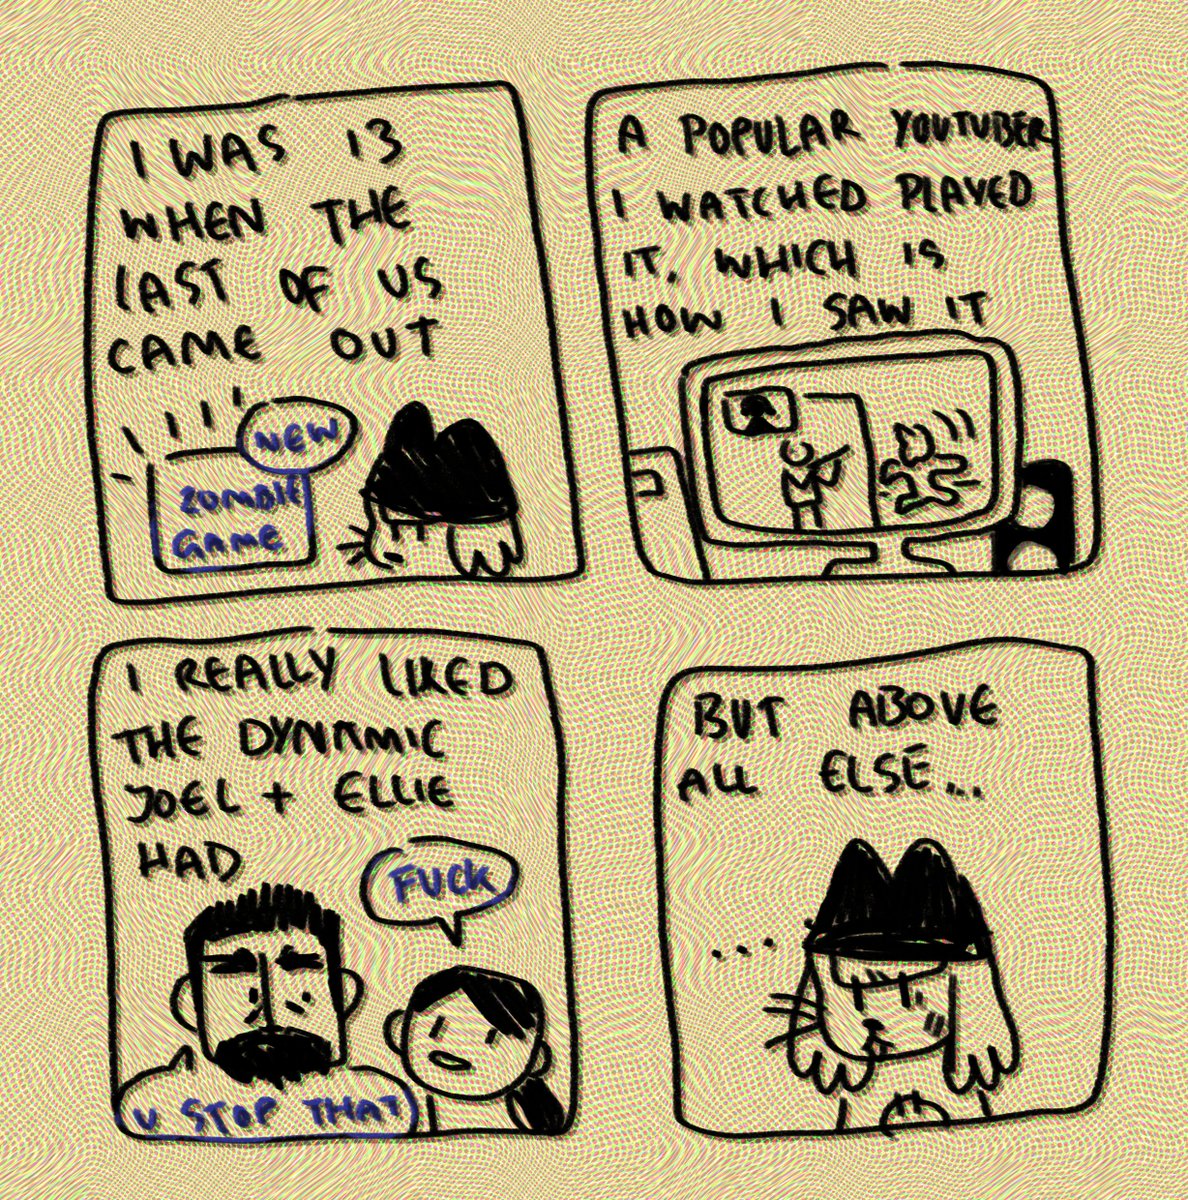 SPOILERS FOR THE LAST OF US PART 2 IN THE 4TH PIC i mean if anyone cares abt spoilers for it still??? idk

v quick comic before i do comms bc TLoU was one of my fave games when i was younger bc im gay which is why naughty dog can suck my entire ass 